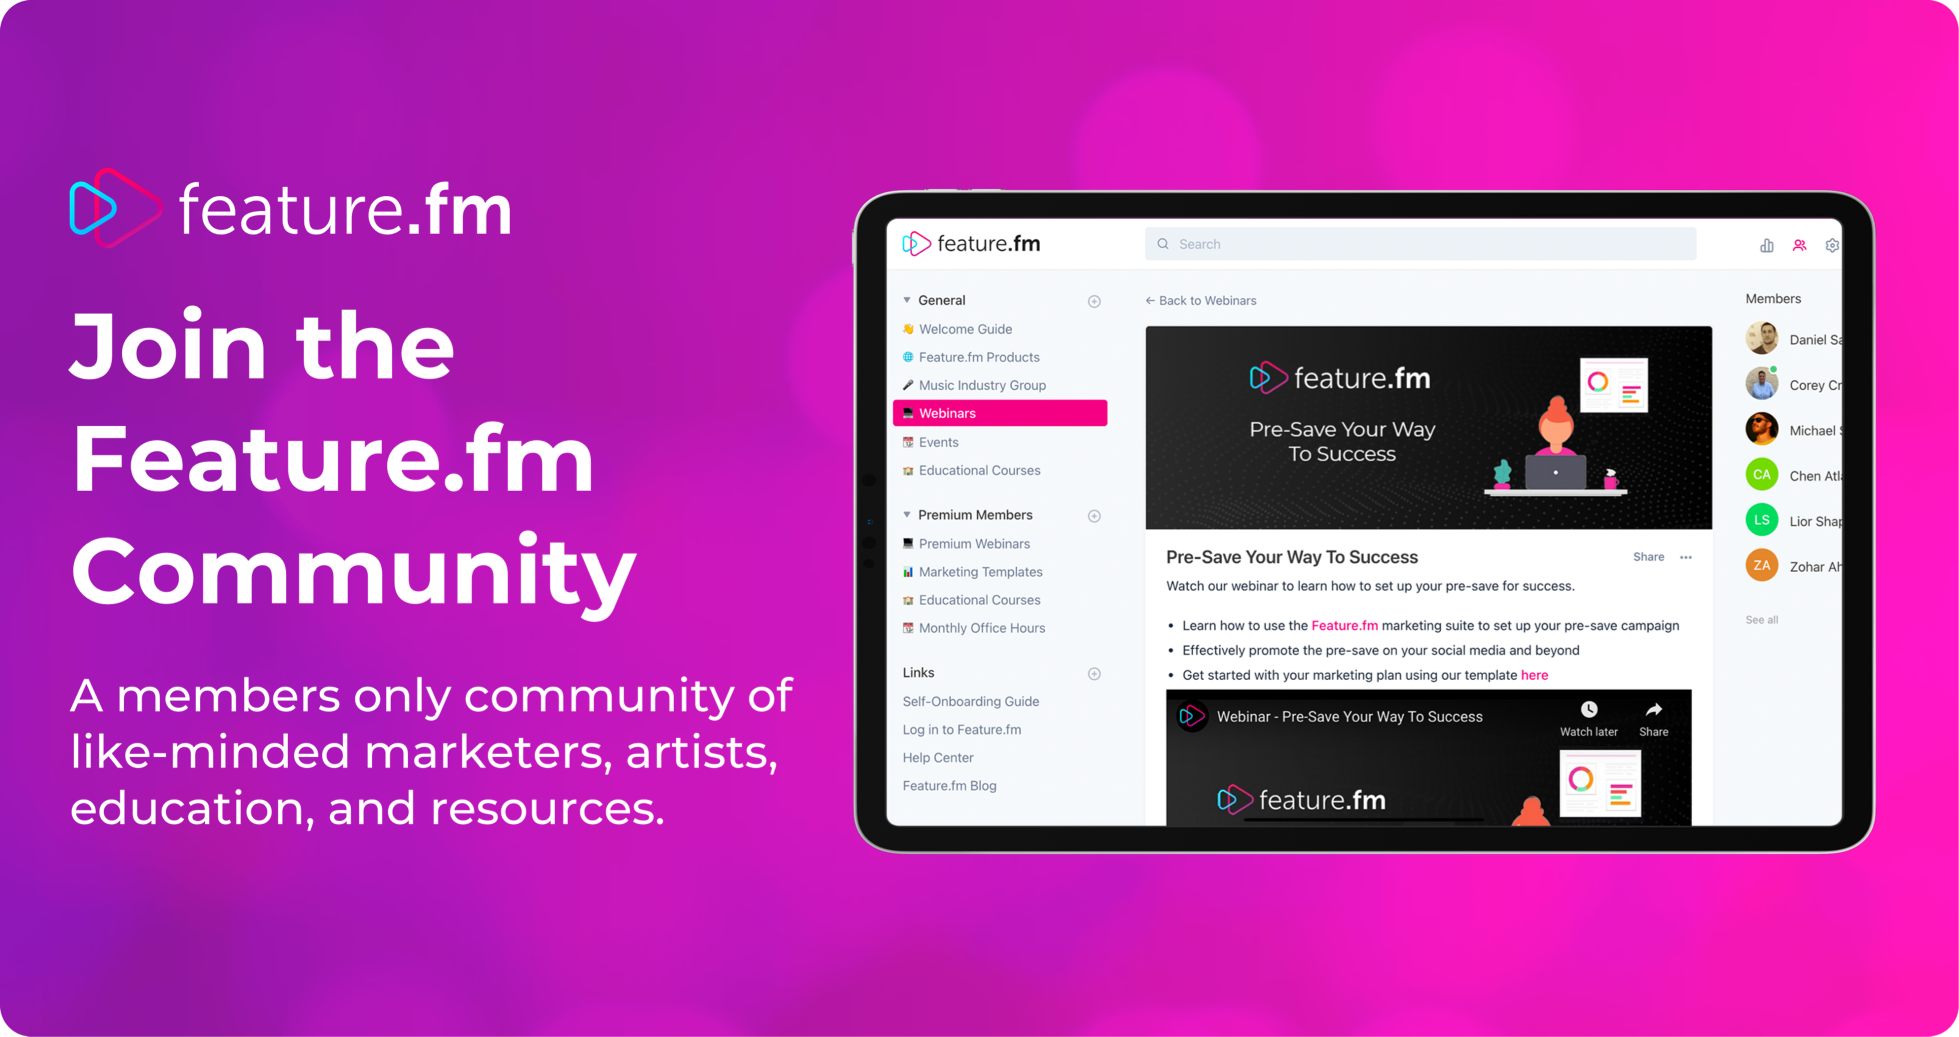 You're invited to join the new Feature.fm Community